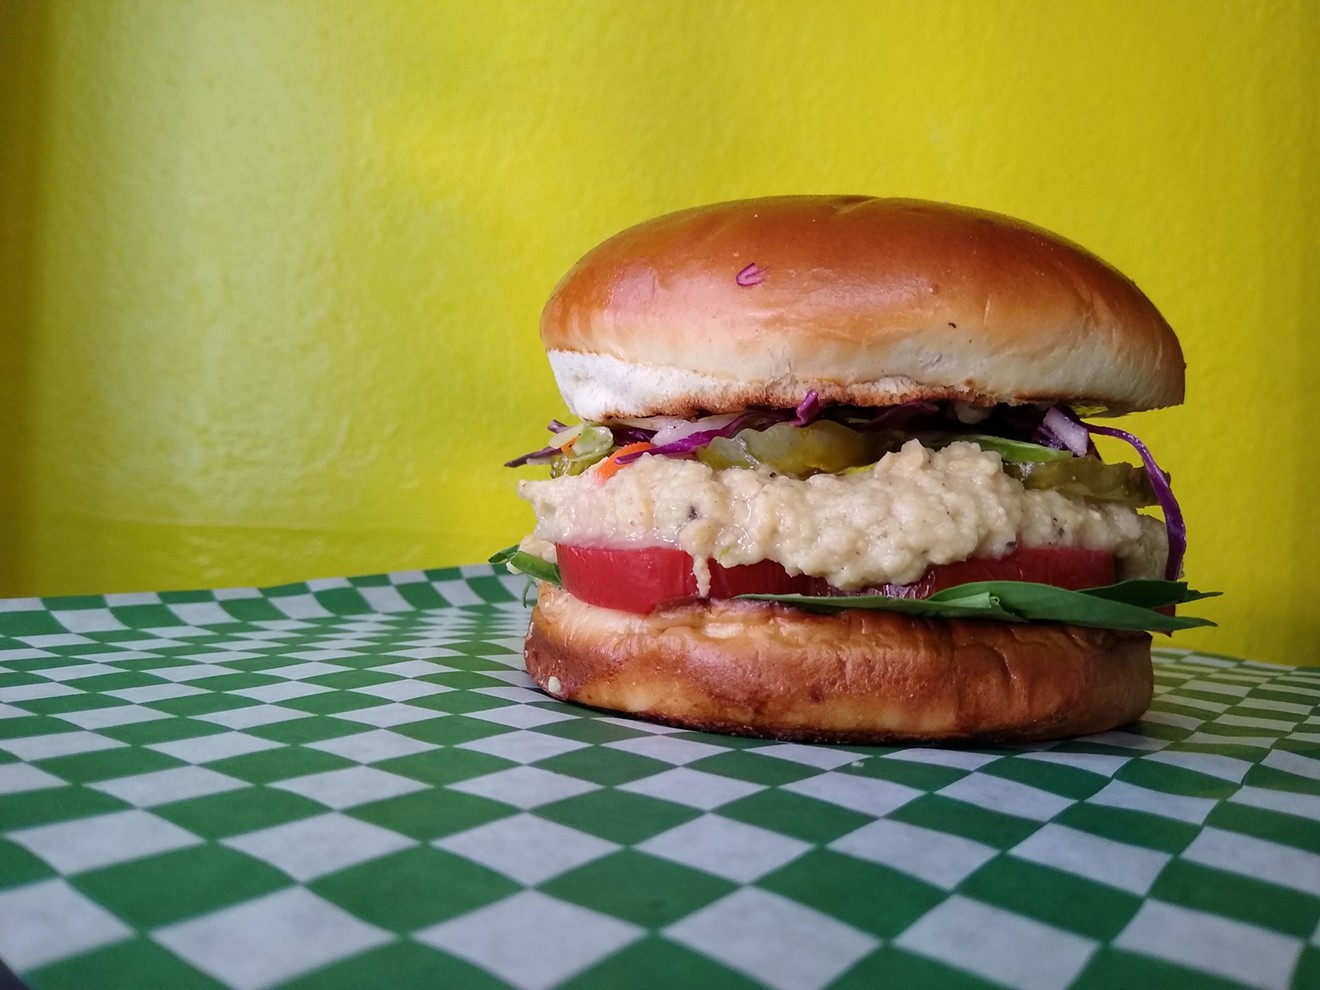 The Dr. J. breakfast sandwich is the No. 1 seller at Early Bird Vegan.